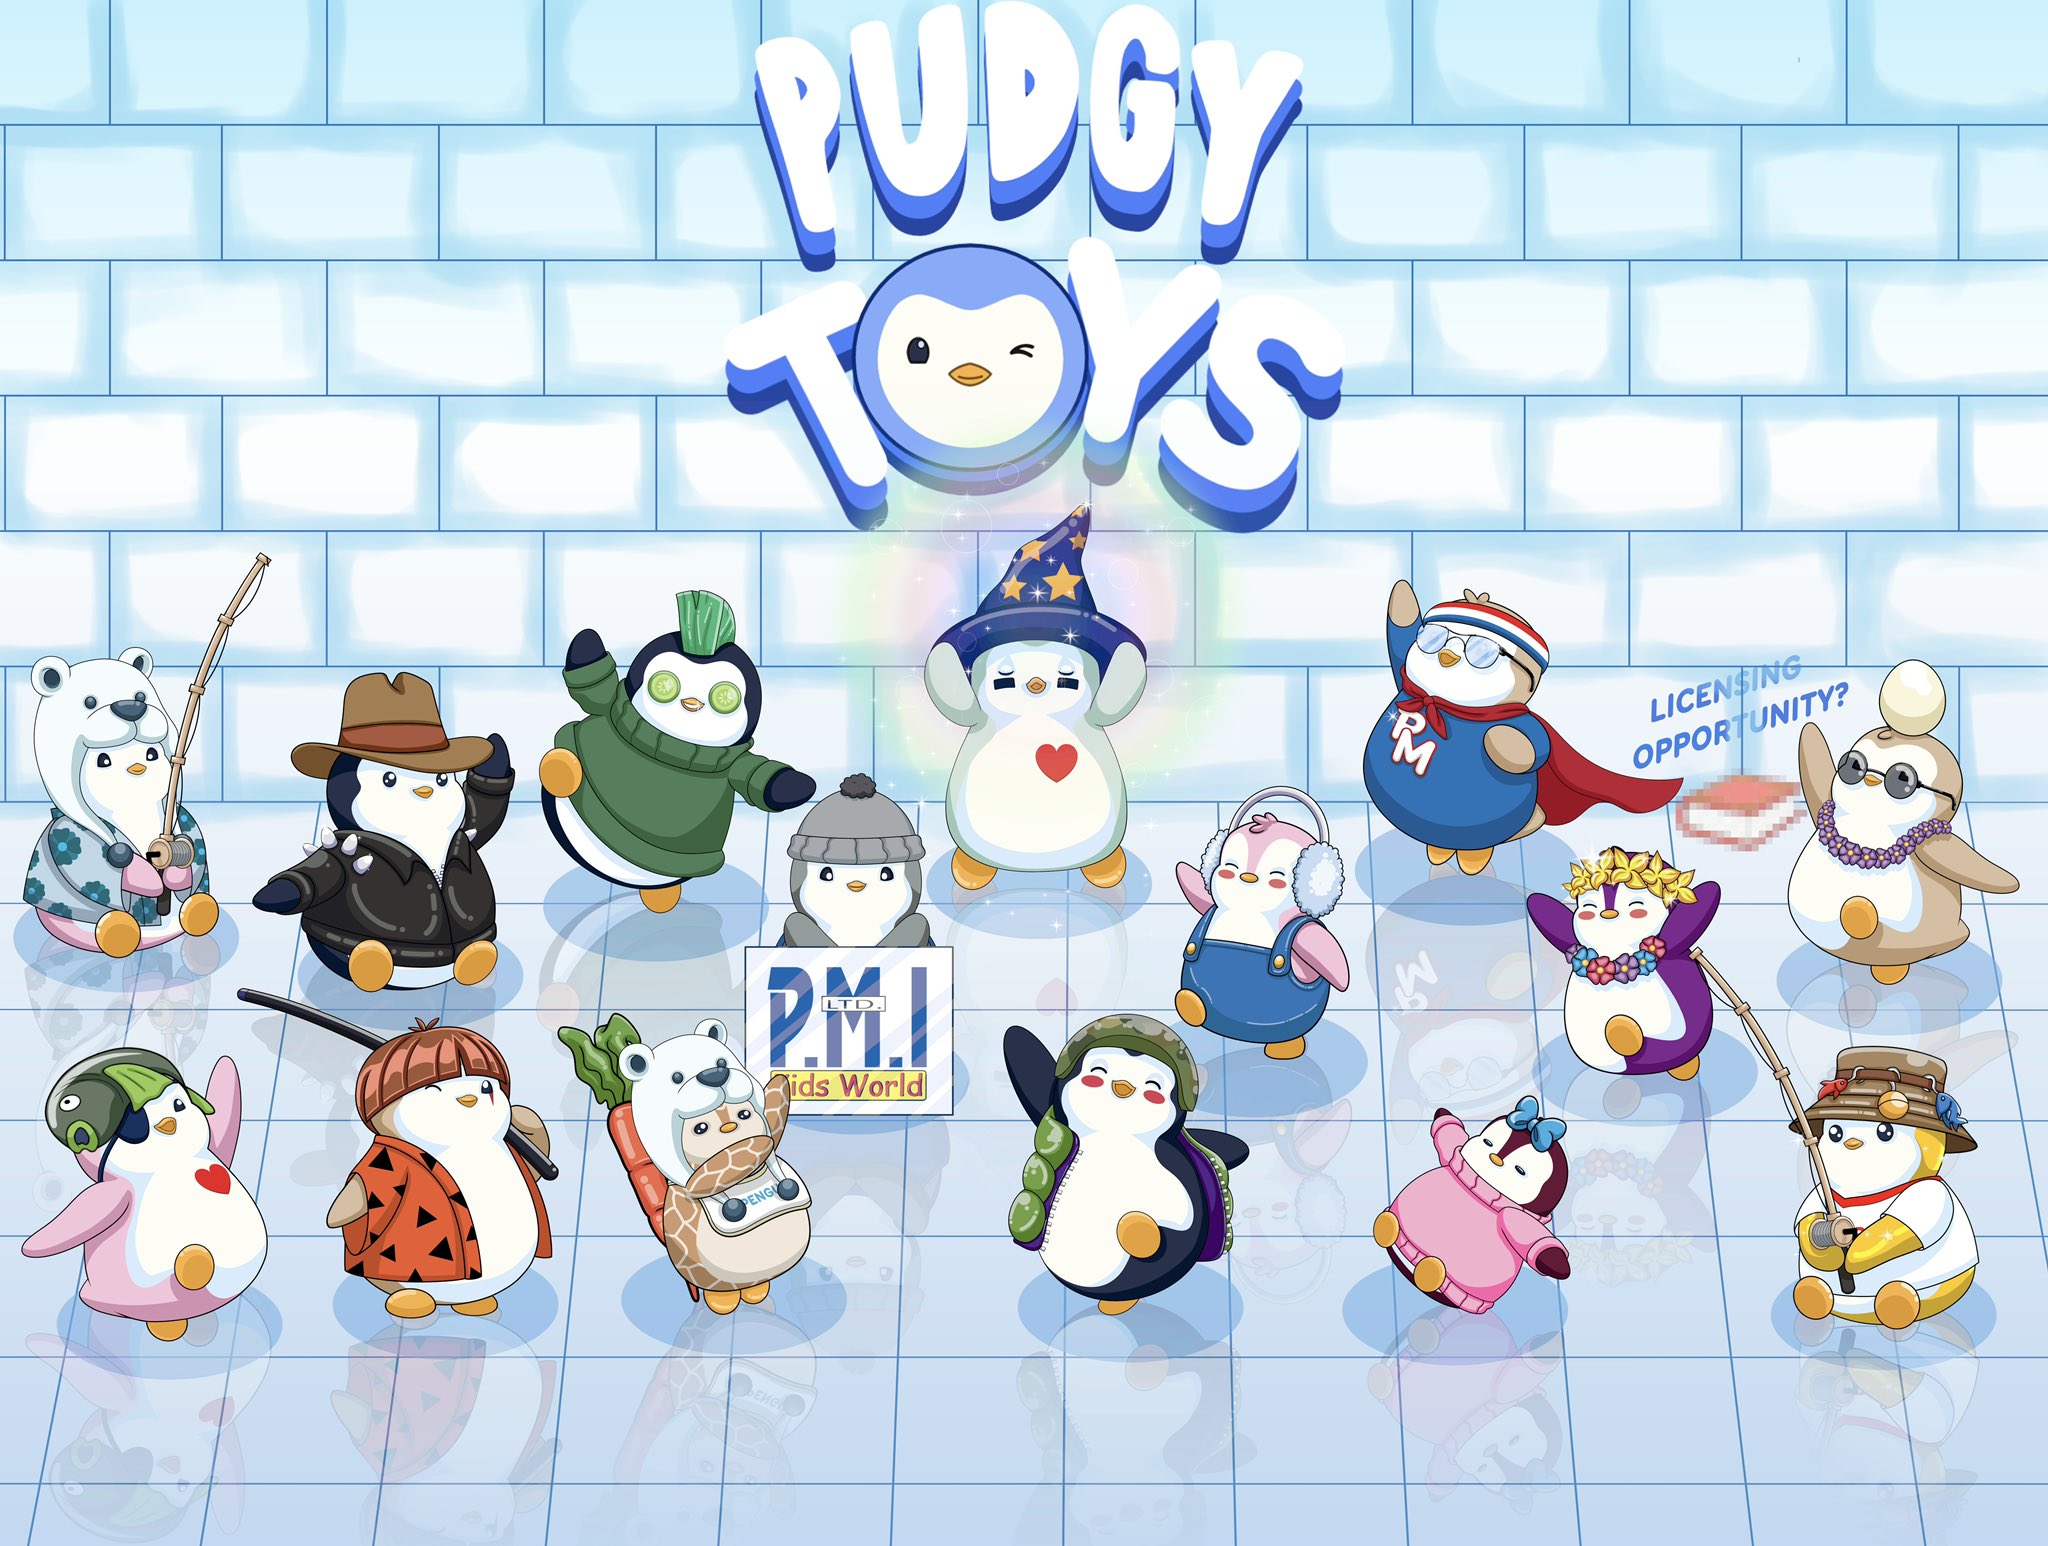 Pudgy Penguins is a name known for its successful customer outreach strategy.